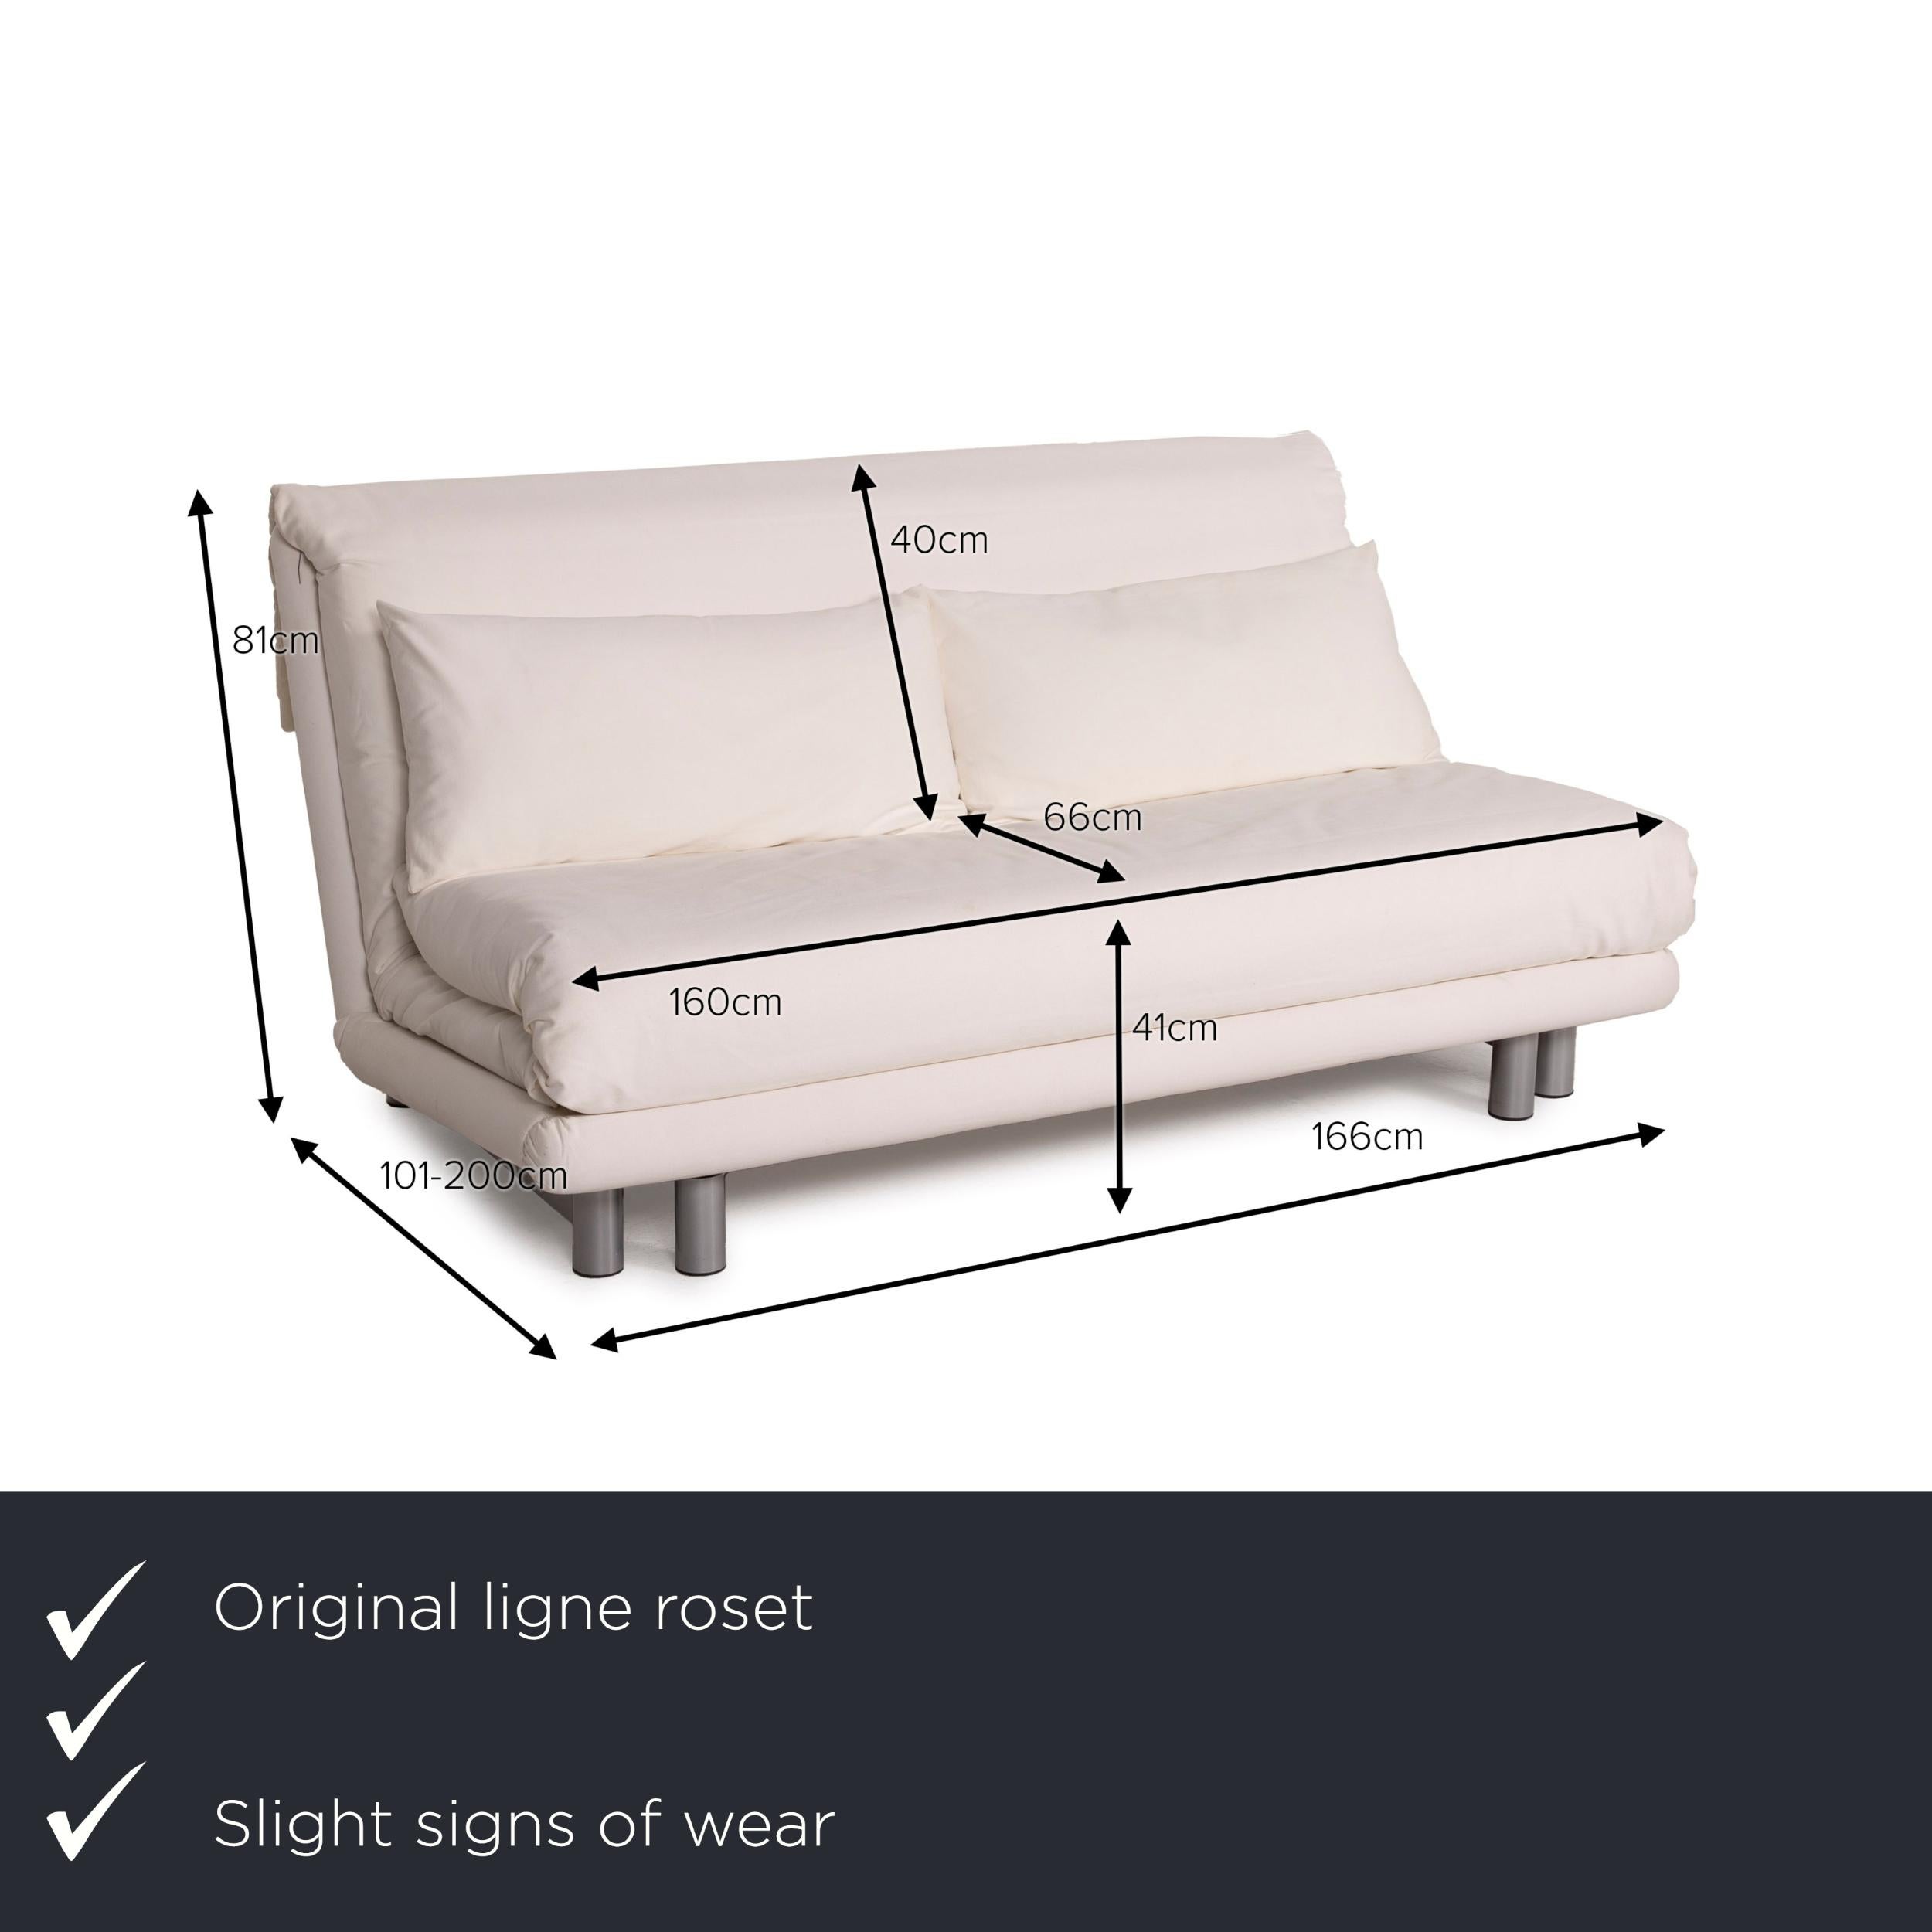 We present to you a Ligne Roset Multy fabric sofa cream two-seater sofa bed.


 Product measurements in centimeters:
 

Depth: 101
Width: 166
Height: 81
Seat height: 41
Rest height:
Seat depth: 66
Seat width: 160
Back height: 40.

 